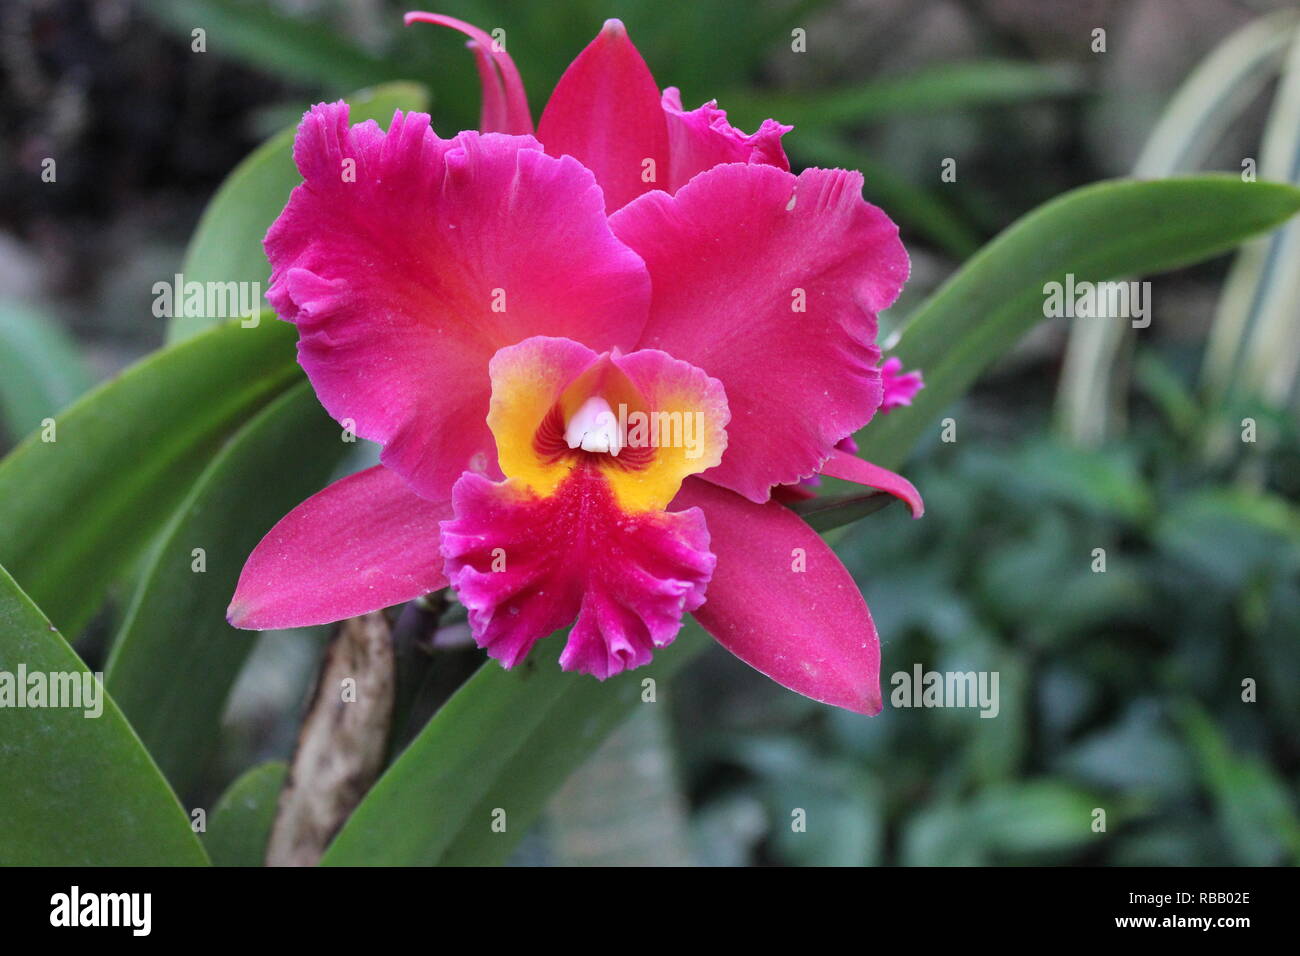 Hot pink and yellow Brassolaeliocattleya orchid, Queen of the Orchids, growing in the flower garden. Stock Photo